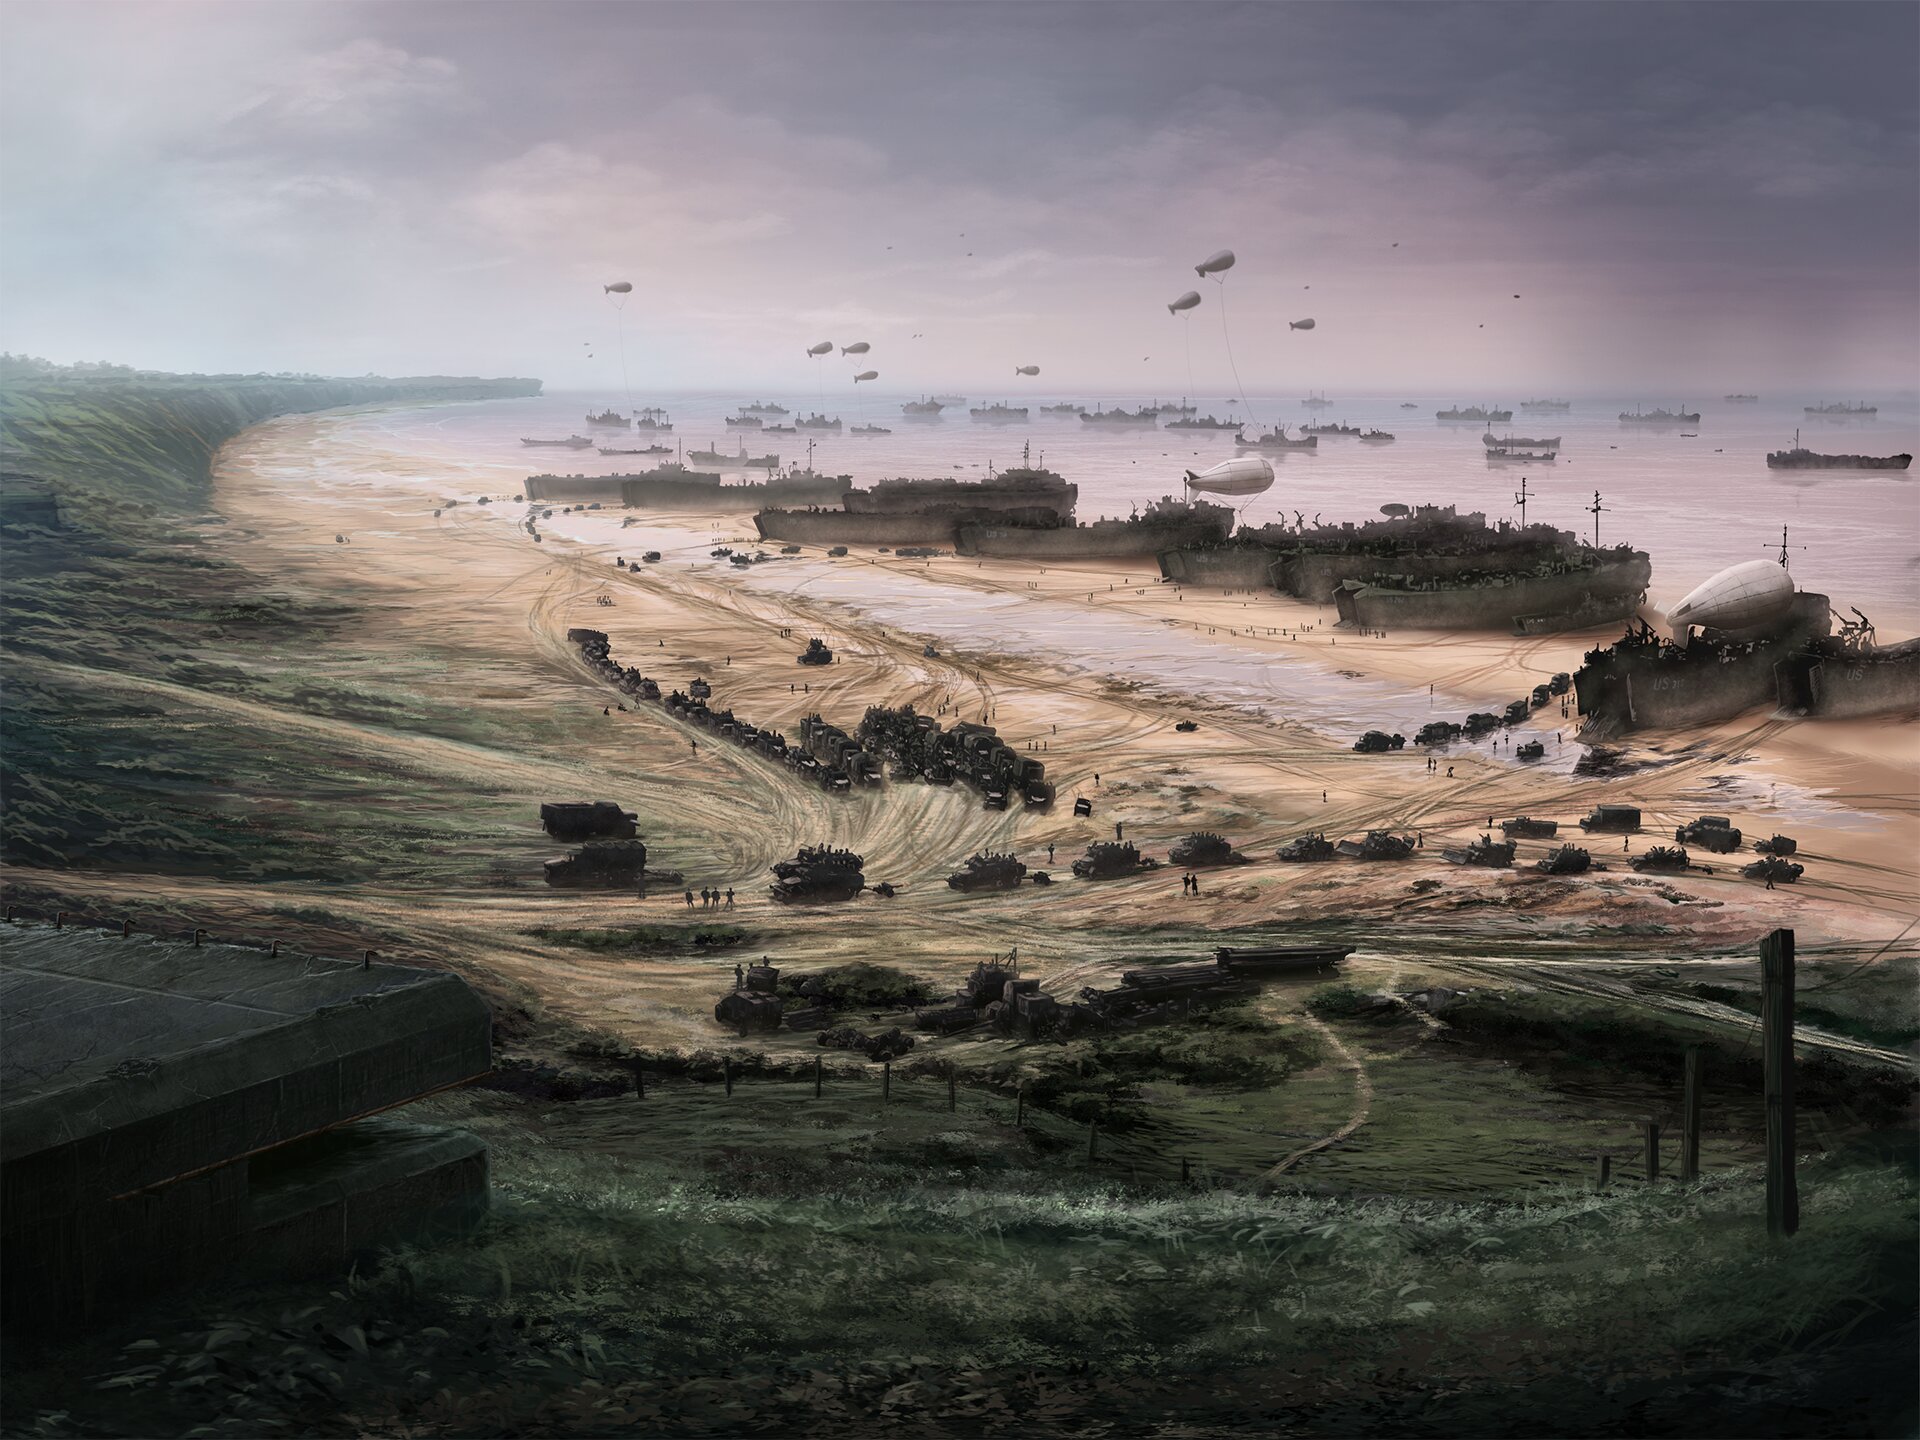 Video Game Hearts of Iron IV HD Wallpaper | Background Image